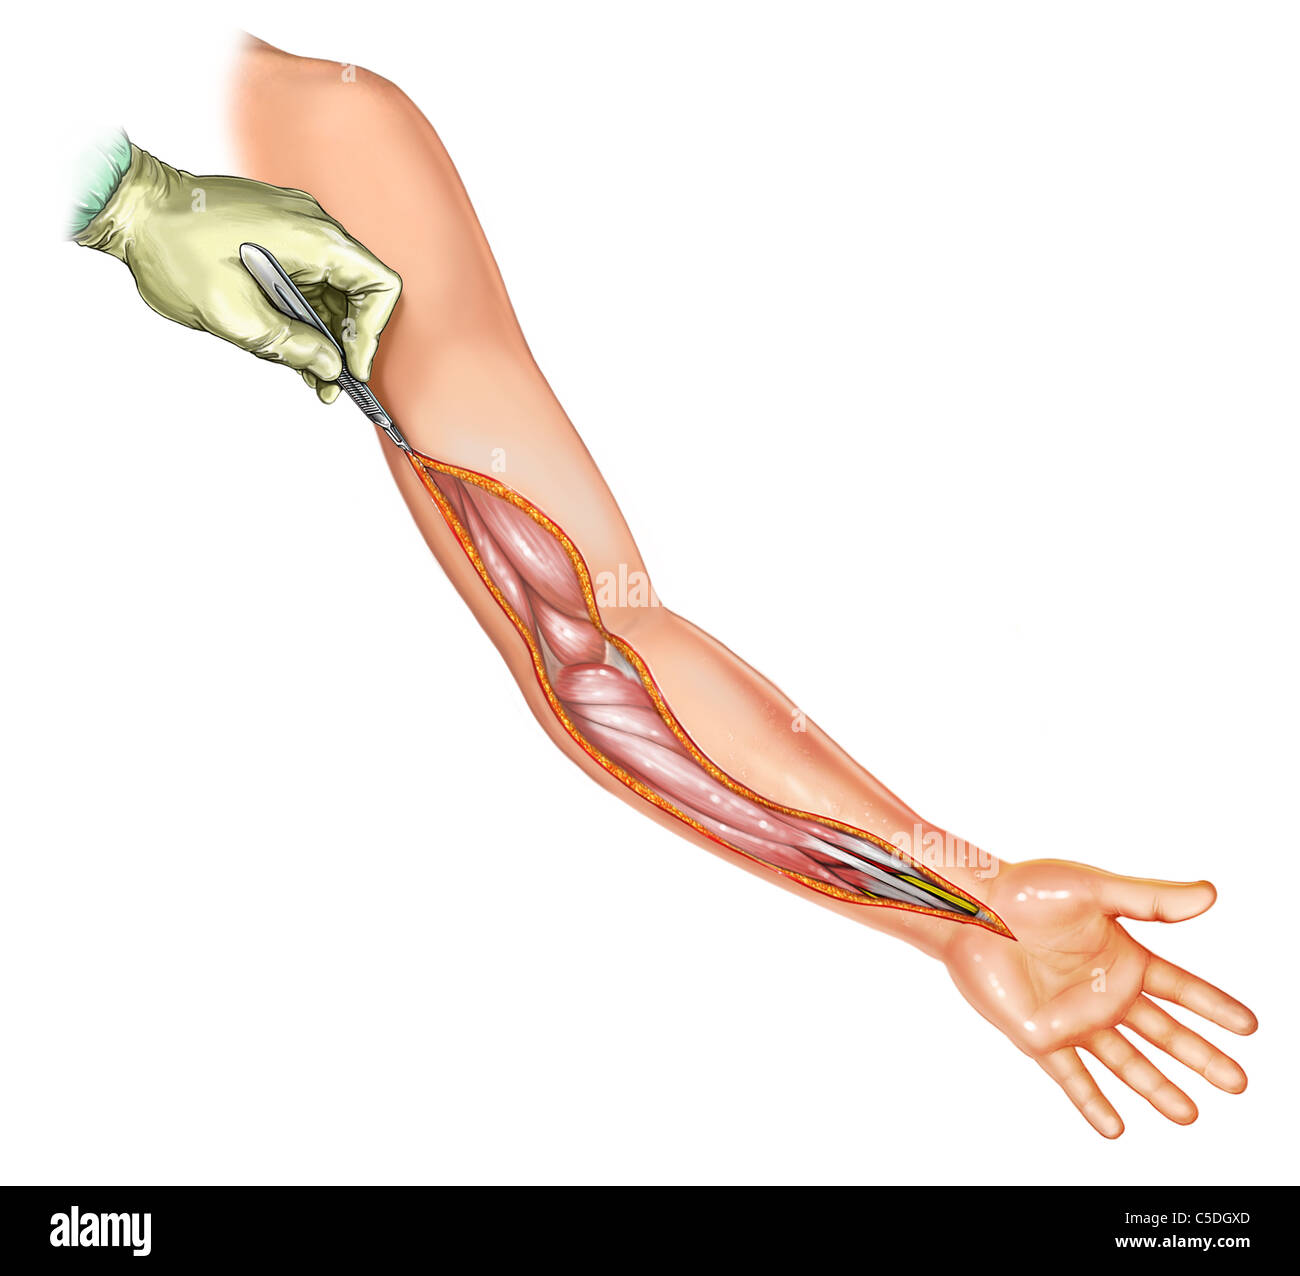 Compartment Syndrome of Arm Stock Photo